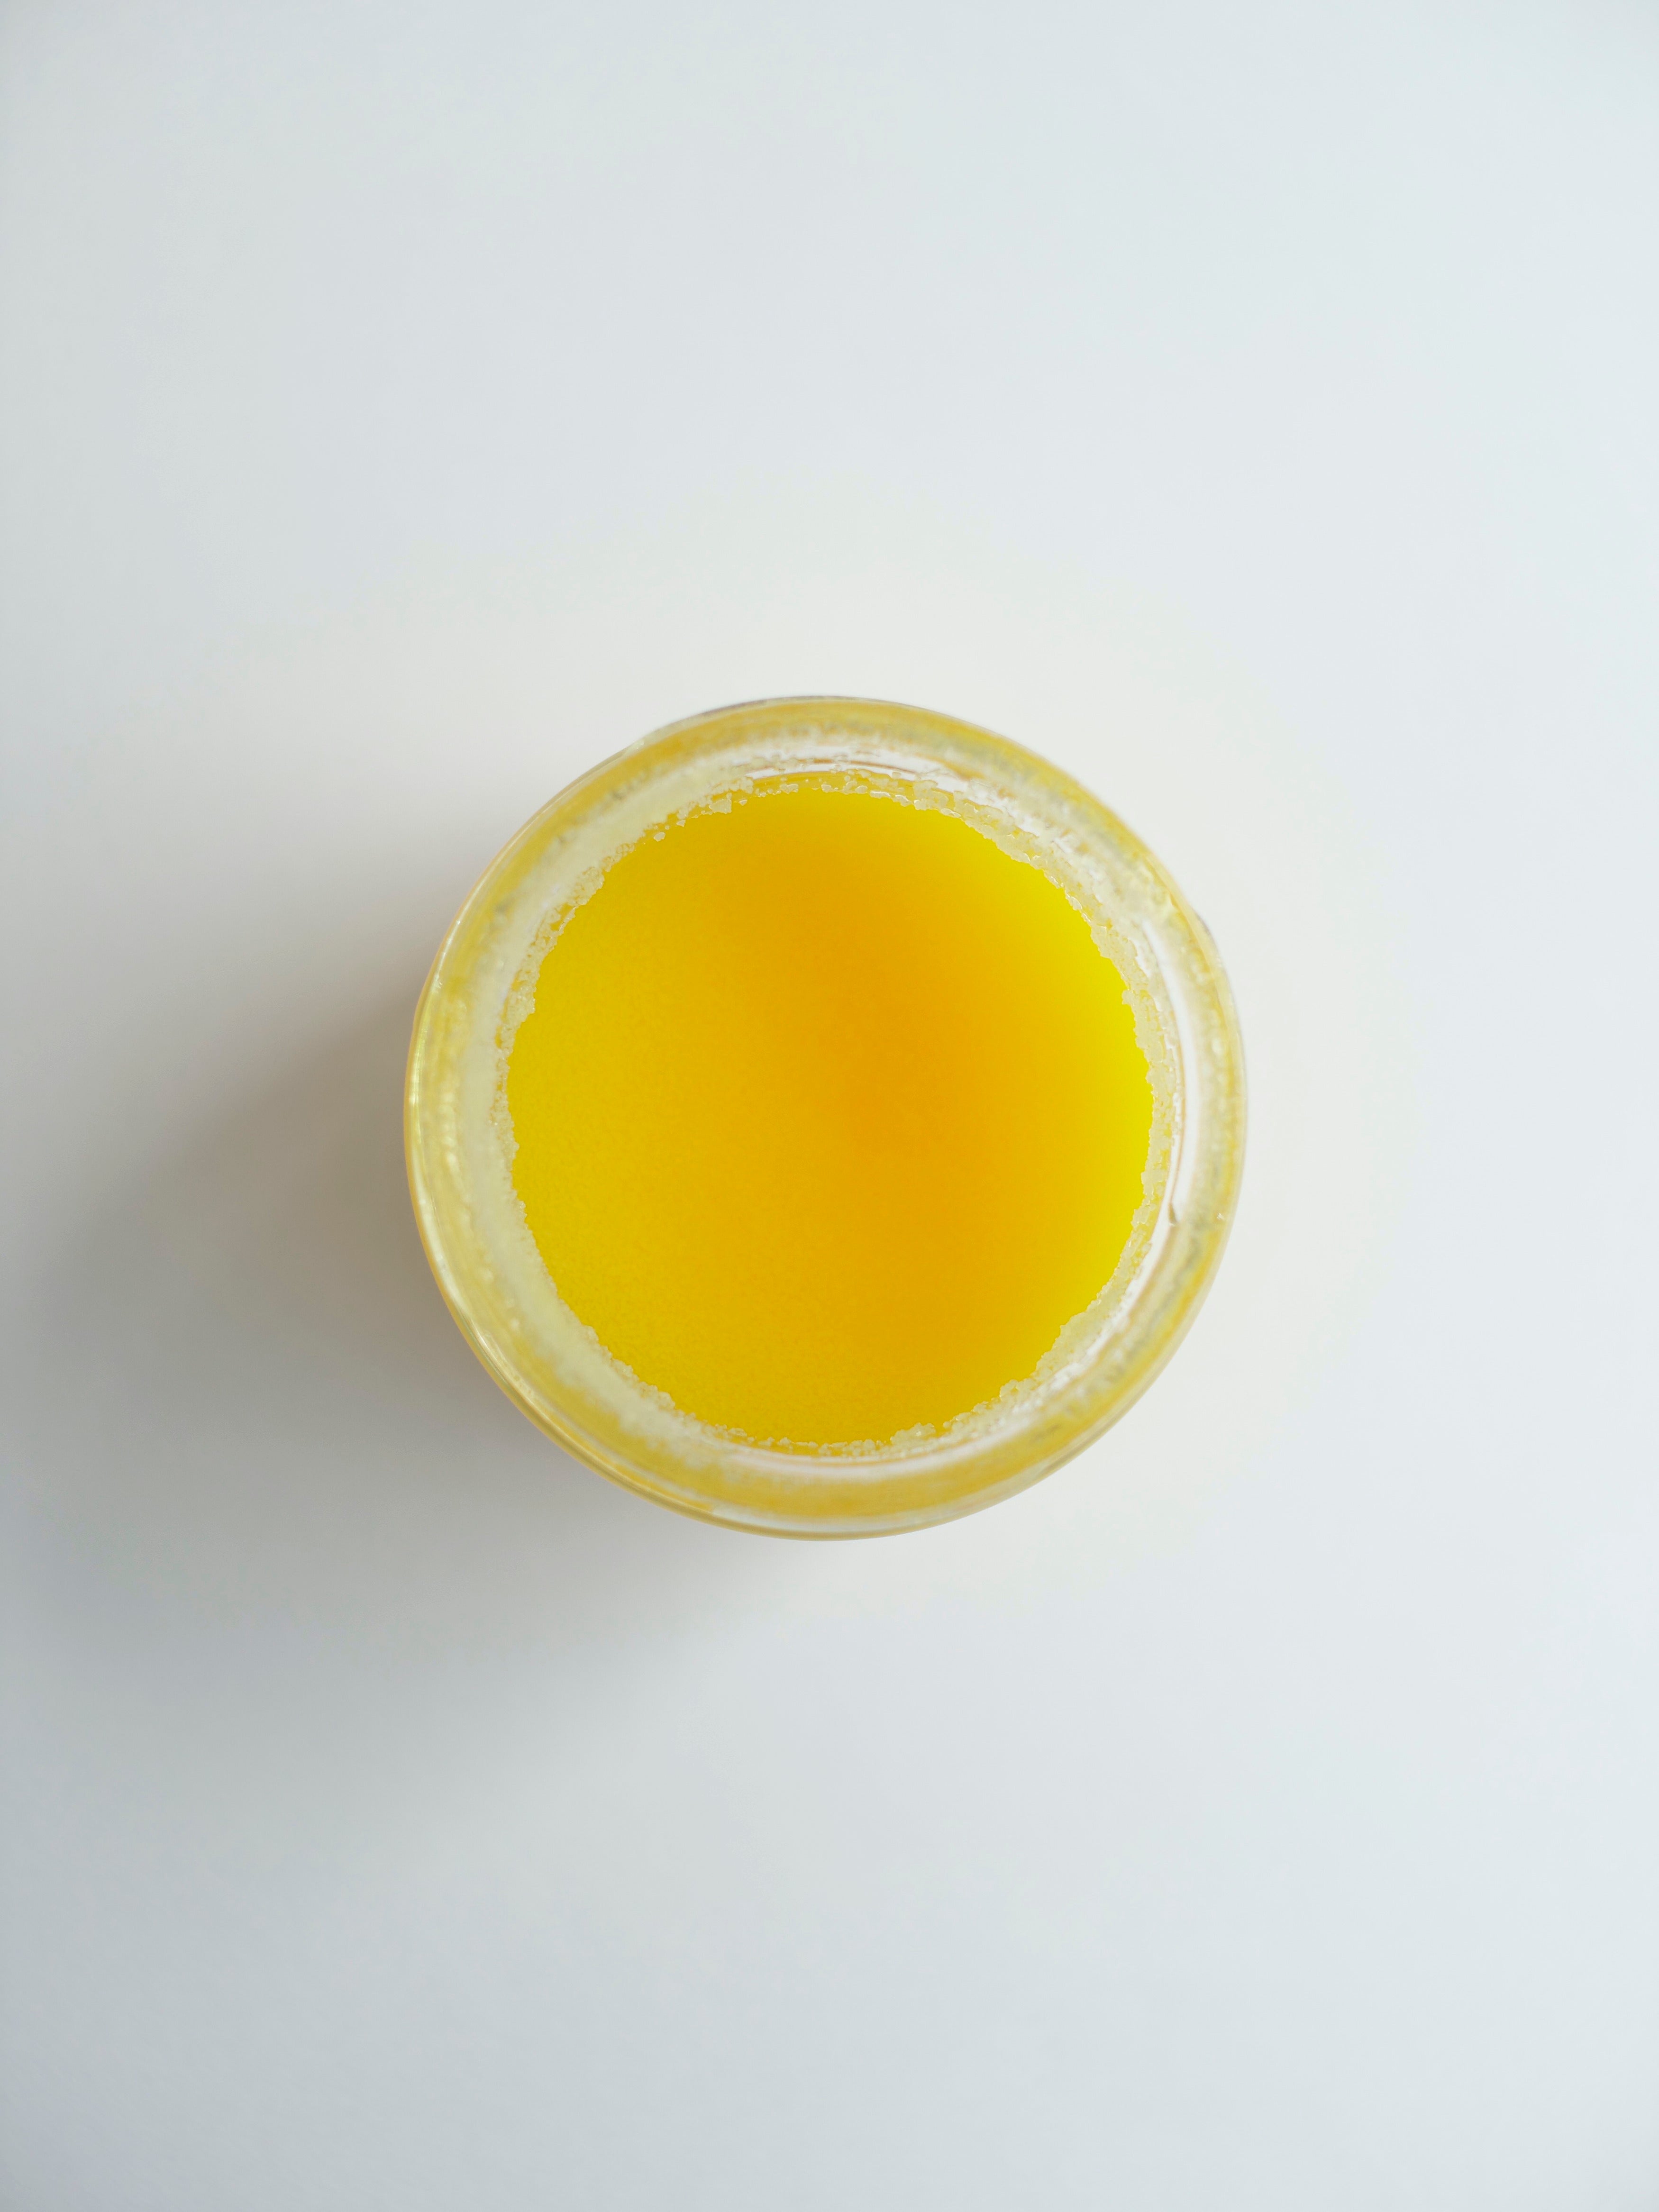 PURE GRASS-FED100% GHEE【ORGANIC | 100g】［LIMITED×50］